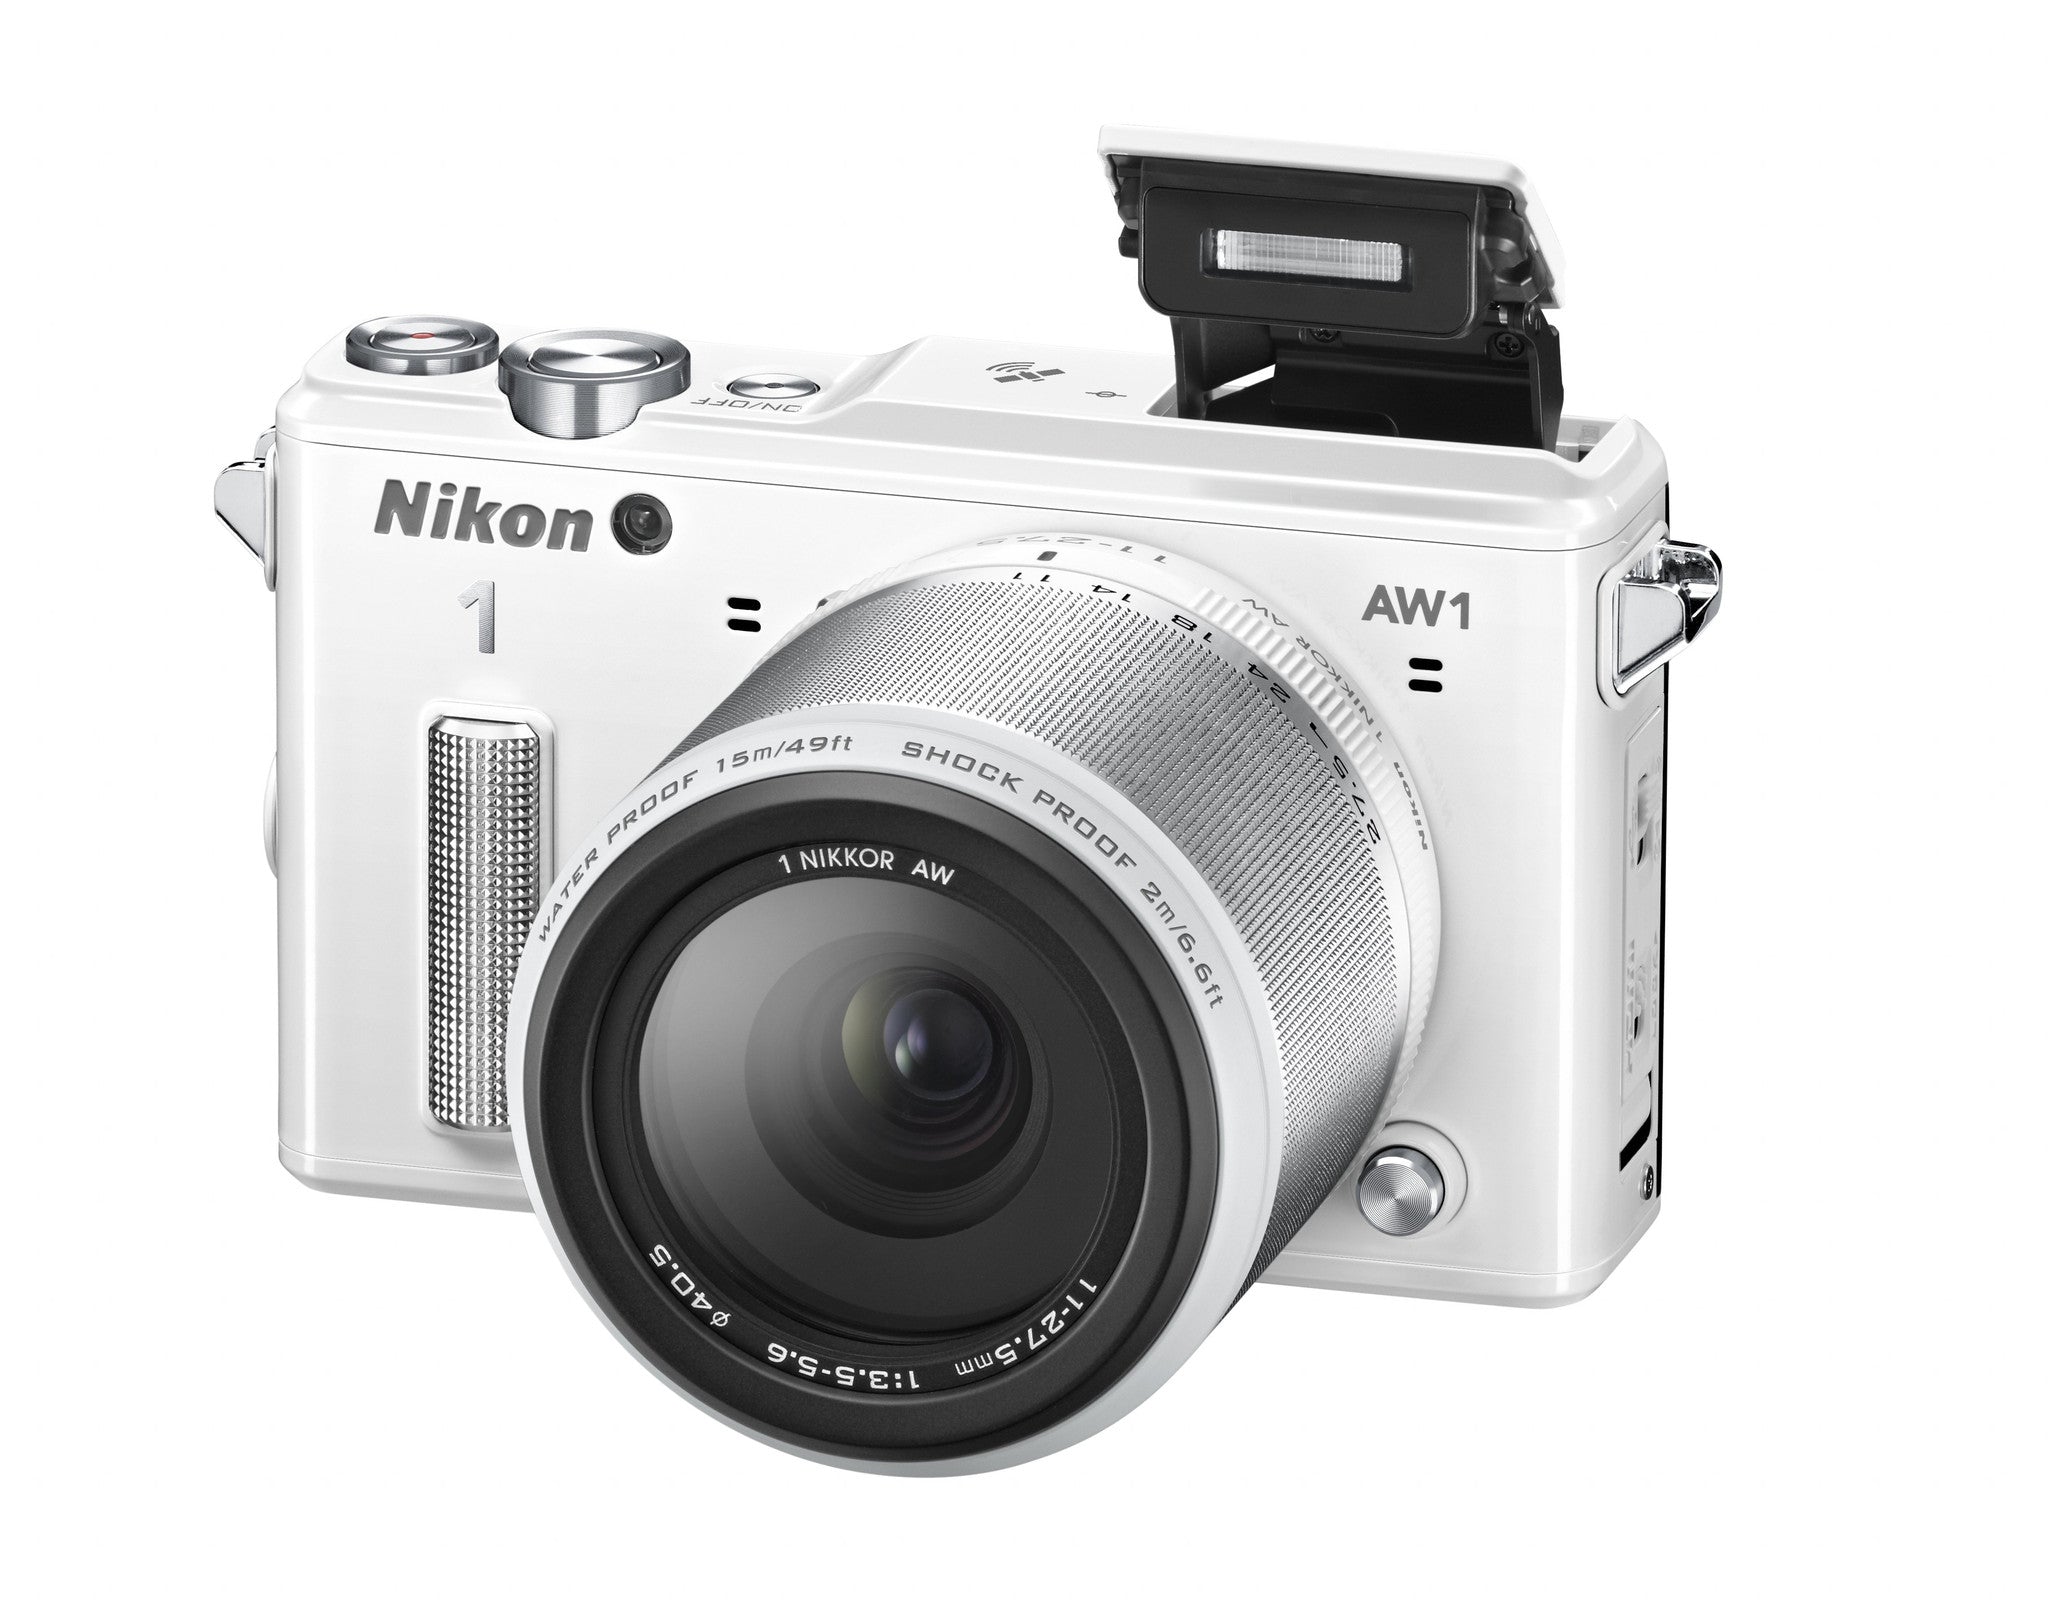 Nikon 1 AW1 Waterproof Digital Camera with AW 11-27.5mm Lens (White), discontinued, Nikon - Pictureline  - 7